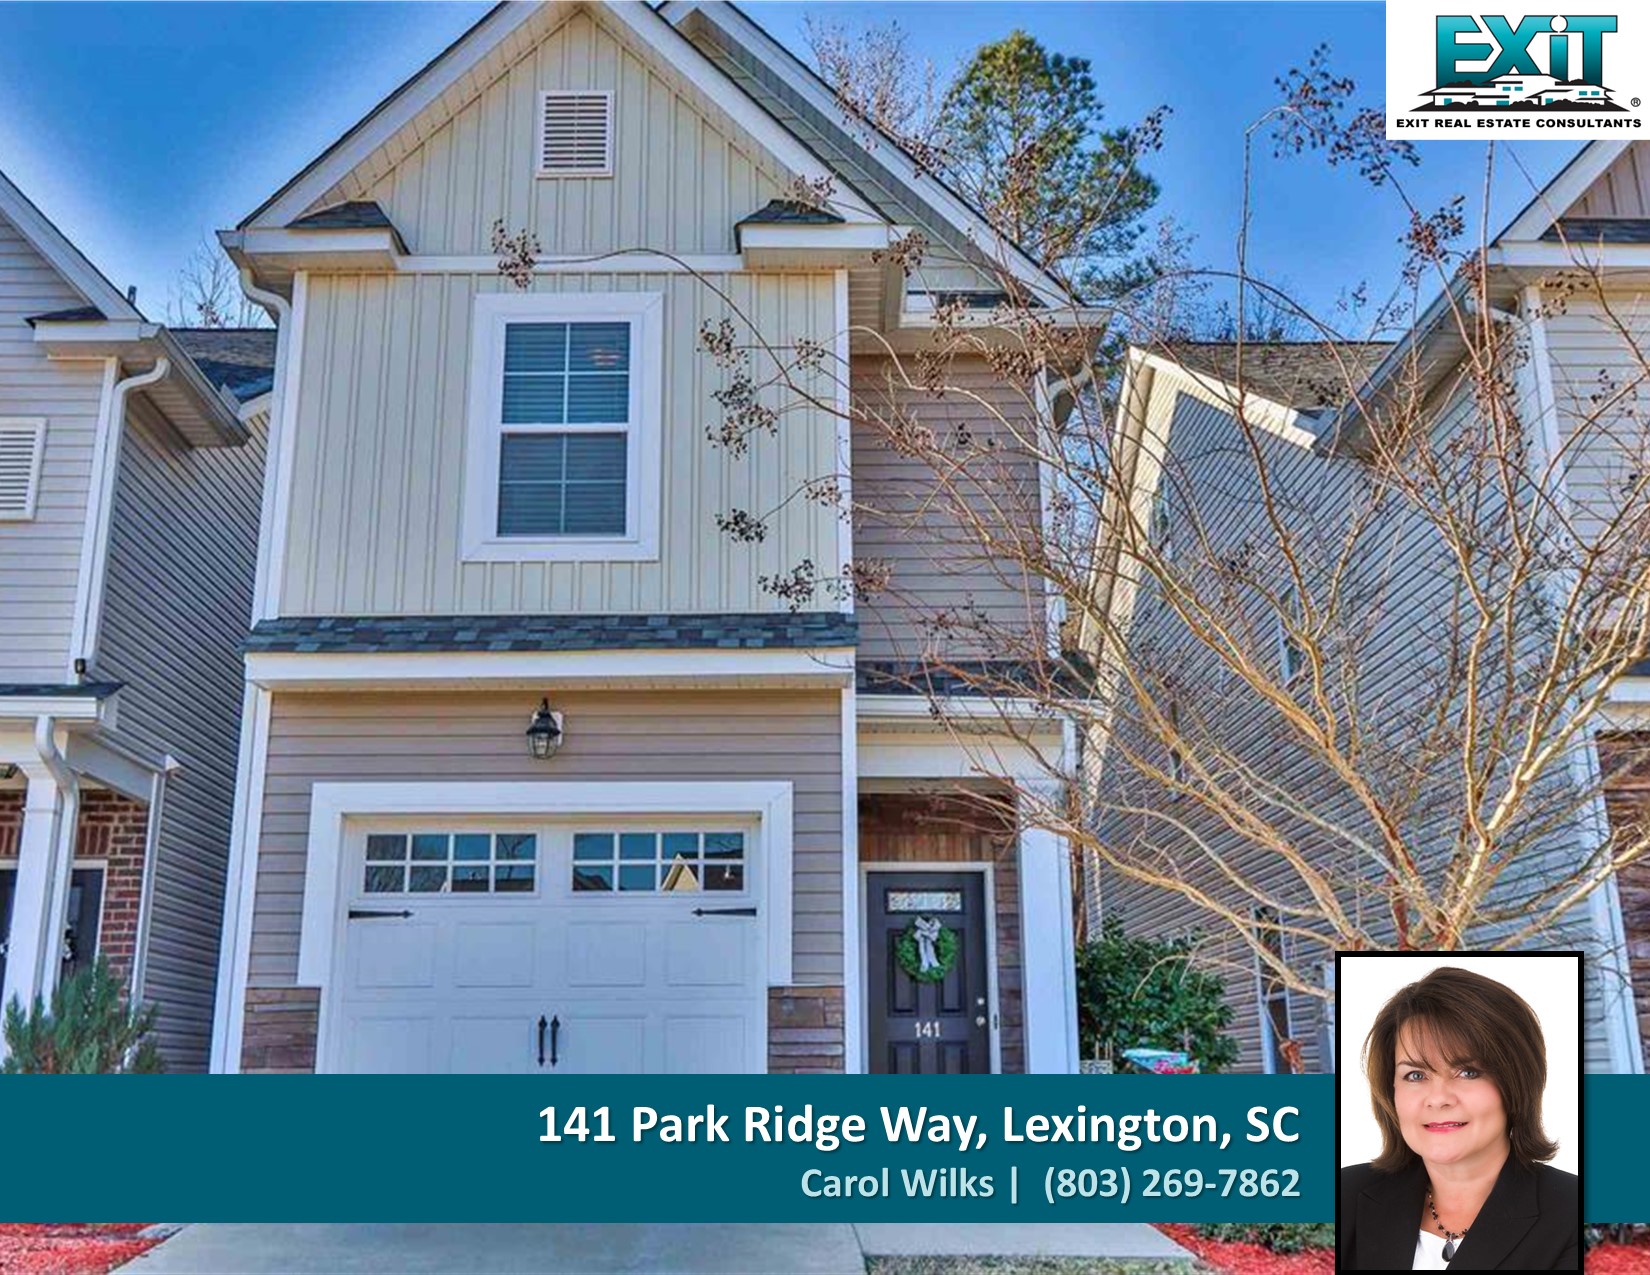 Just listed in Park Ridge